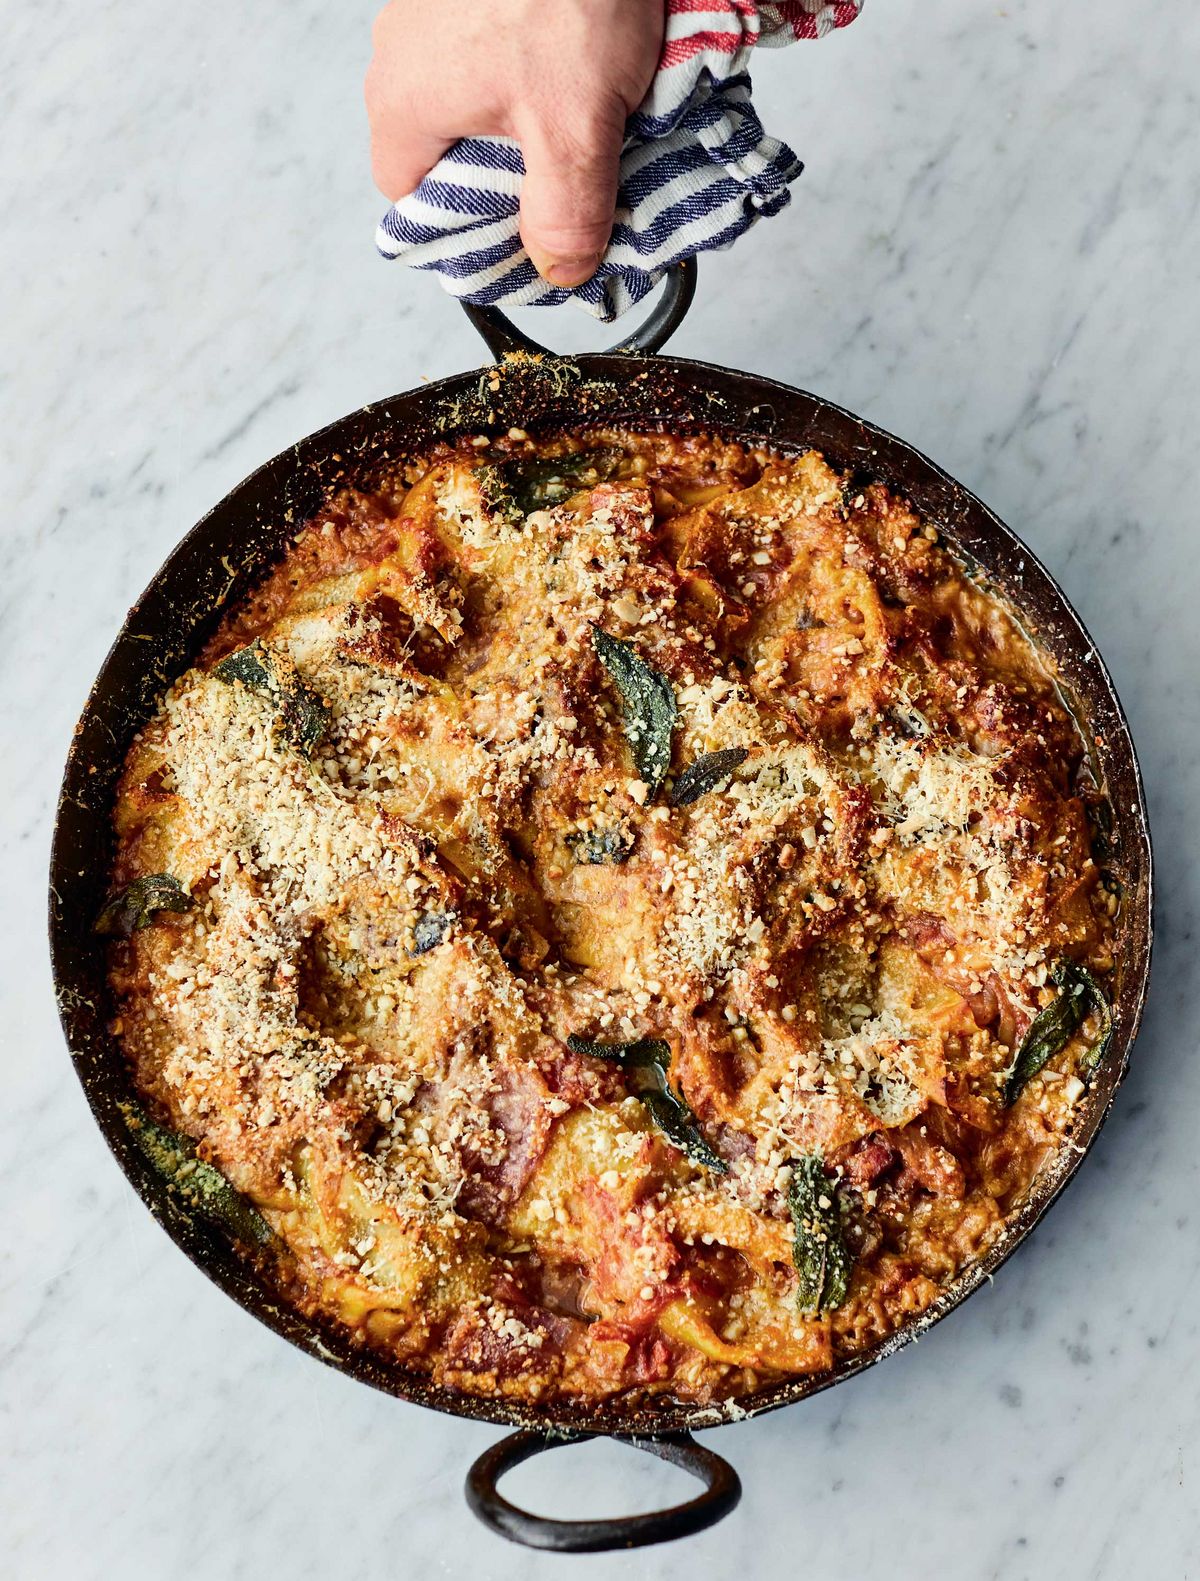 Jamie Oliver’s Scruffy Aubergine Lasagne with Sweet Tomato Sauce with Garlic, Sage and Lemon, Cheese and Almond Crunch